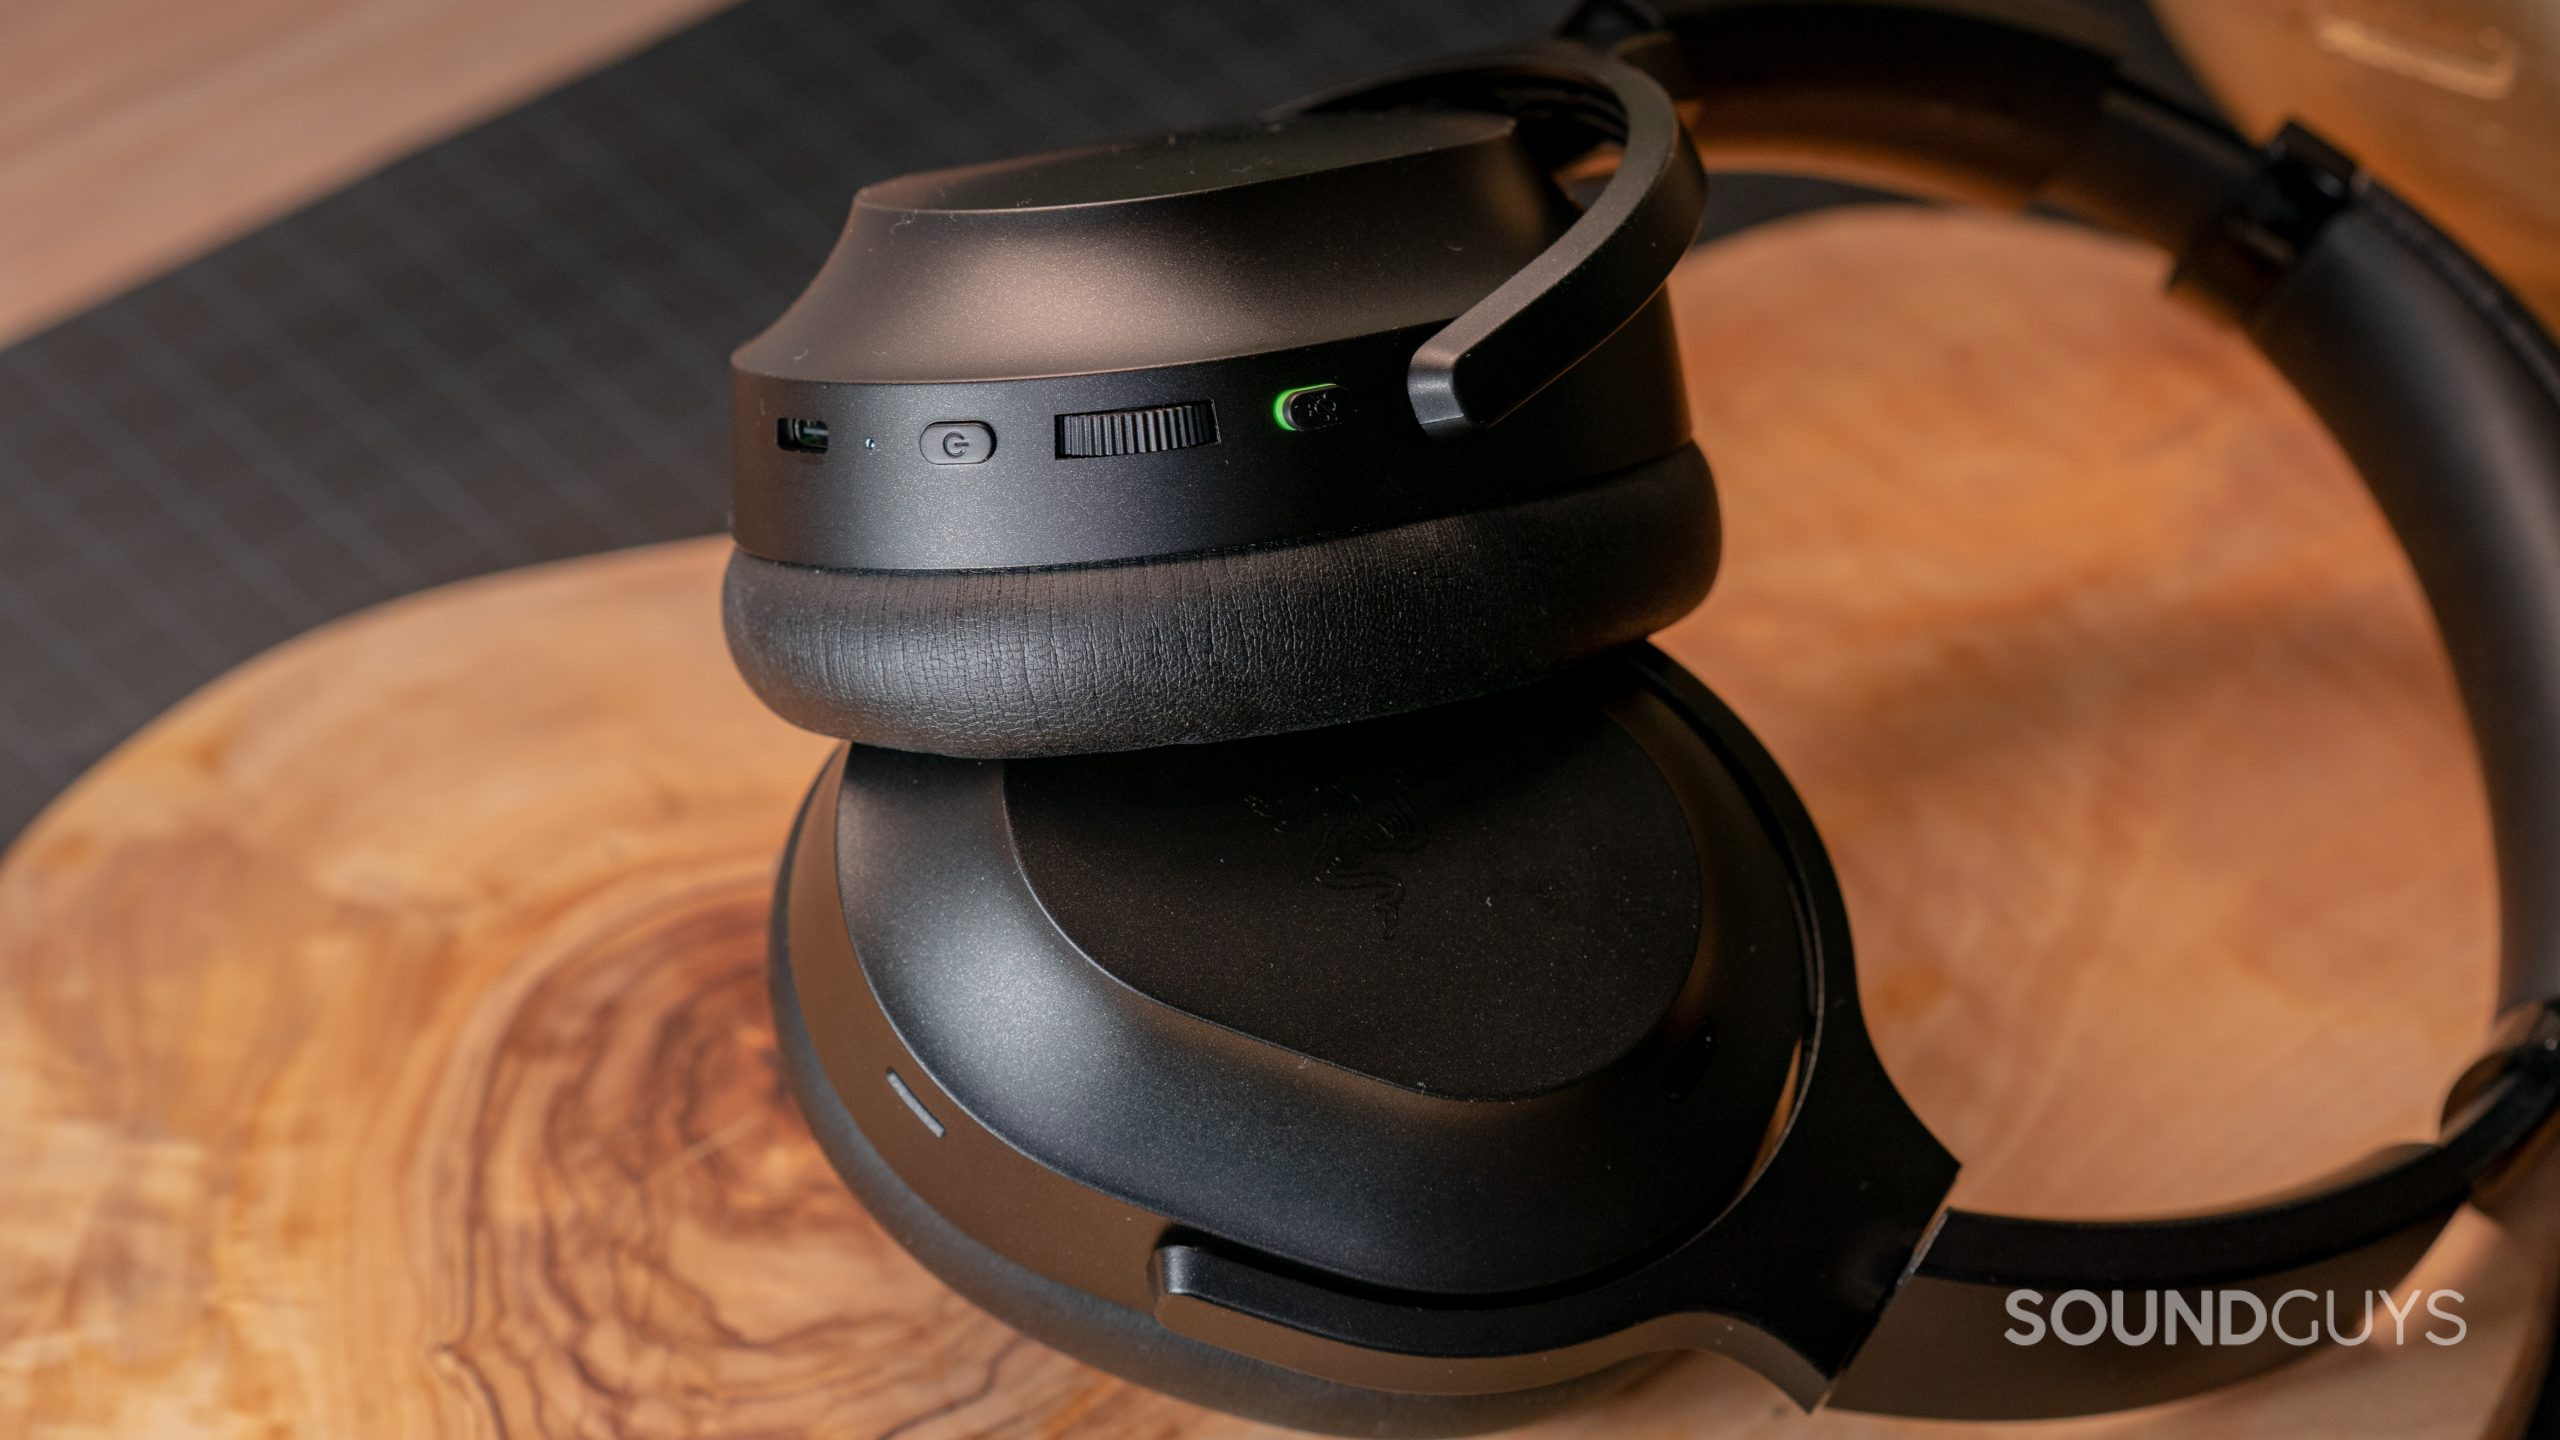 Razer Barracuda Pro review: A less embarrassing gaming headset